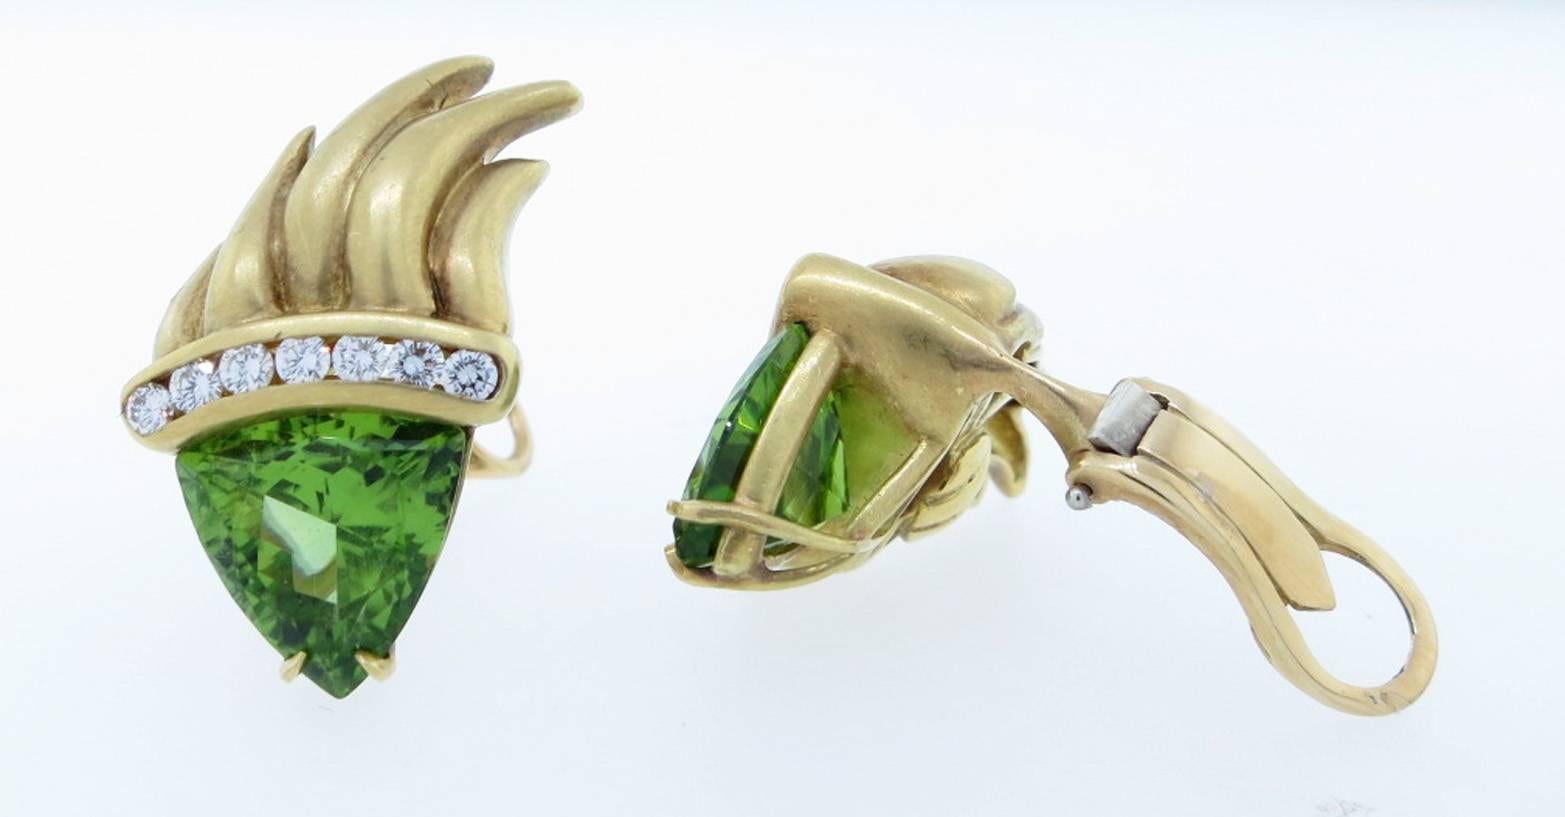 Opposing flame design 18kt. yellow gold earrings. Each clip-back earring is prong set with a triangular shape fine color natural peridot each weighing approx 4.5cts. The top of each is channel set with seven round brilliant cut diamonds totaling